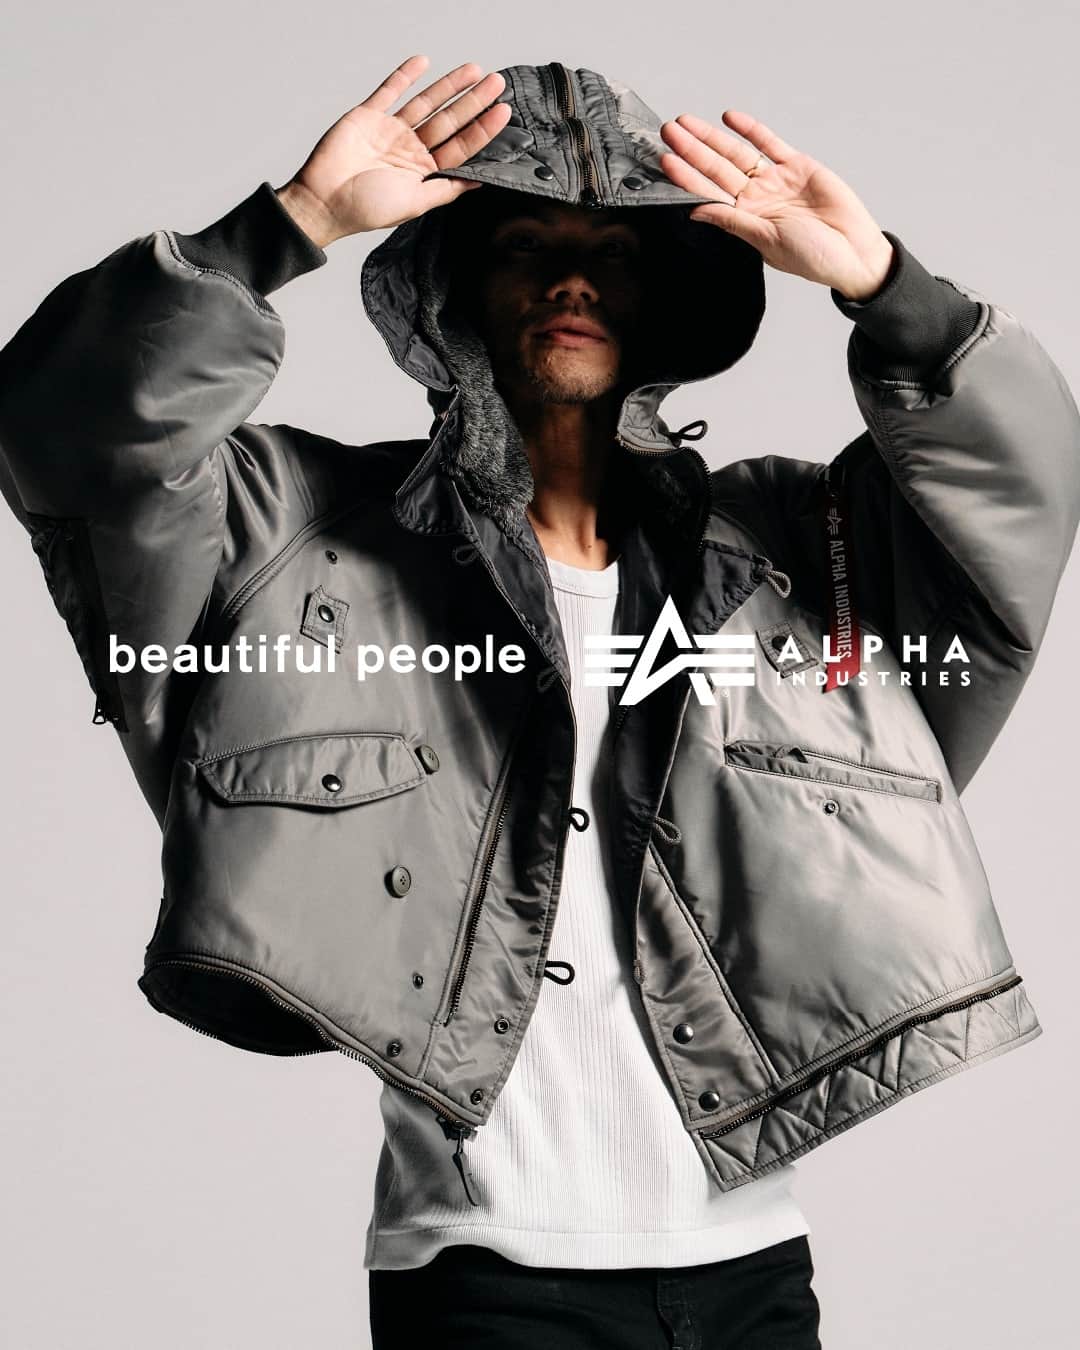 ビューティフルピープルさんのインスタグラム写真 - (ビューティフルピープルInstagram)「#DOUBLEEND beautiful people x ALPHA INDUSTRIES @alphaindustries @alpha_industries_japan⁠ 4-WAY flight jacket⁠ ⁠ ◻︎ ⁠beautiful people x ALPHA INDUSTRIES double-end nylon flight jacket⁠ color: ⁠gray*navy⁠ size: ⁠34/36/38/40/42⁠ material: ⁠nylon 100%⁠ ALPHA INDUSTRIESとのコラボレーションブルゾン。上下逆さまに着用することで、N-2BがMA-1へと変化します。さらにリバーシブルで着用することで、オリジナルのネイビーカラーに。⁠ 確かな実績を誇るALPHA縫製工場にて作成された本格仕様です。ダブルエンドならではのボリューム感とデザインのありそうでない1着に。⁠ ⁠ ⁠ ALPHA INDUSTRIES and beautiful people have collaborated for the first time to launch a new 4-way bomber jacket with authentic military specifications.⁠ ⁠ Inspired by a test sample of a 1958 N-2B flight jacket, which was never released to the public, and ALPHA's signature MA-1 vintage flight army, this bomber jacket is a surprising 4-way specification that can be worn inside-out and upside-down.⁠ ⁠ ___⁠ ⁠ ⁠ ■Online store⁠ www.beautiful-people.jp⁠ ⁠ ■Global Online store⁠ www.beautiful-people-creations-tokyo.com⁠ ⁠ ■ 青山店⁠⁠⁠⁠ 東京都港区南青山3-16-6⁠⁠⁠⁠ ⁠⁠⁠⁠ ■ 新宿伊勢丹店⁠ 伊勢丹新宿店本館2階⁠ TOKYOクローゼット/リ・スタイルTOKYO⁠⁠⁠⁠ ⁠⁠⁠⁠ ■ 渋谷PARCO店⁠ 渋谷パルコ2階⁠ ⁠ ■ ジェイアール名古屋タカシマヤ店⁠ ジェイアール名古屋タカシマヤ4階⁠ モード＆トレンド「スタイル＆エディット」⁠⁠⁠⁠ ⁠⁠⁠⁠ ■⁠阪急うめだ店⁠ 阪急うめだ本店3階　モード⁠⁠⁠⁠ ___⁠ ⁠ #beautifulpeople⁠⁠⁠ #ビューティフルピープル⁠⁠⁠ #SideC ⁠ #DOUBLEEND⁠ #ダブルエンド⁠ #collaboration⁠ #コラボ⁠ #MA1⁠ #N2B⁠ #reversible⁠ #4way⁠ #flightjacket⁠ #blouson⁠ #ALPHAINDUSTRIES⁠ #ALPHA」10月15日 12時00分 - beautifulpeople_officialsite